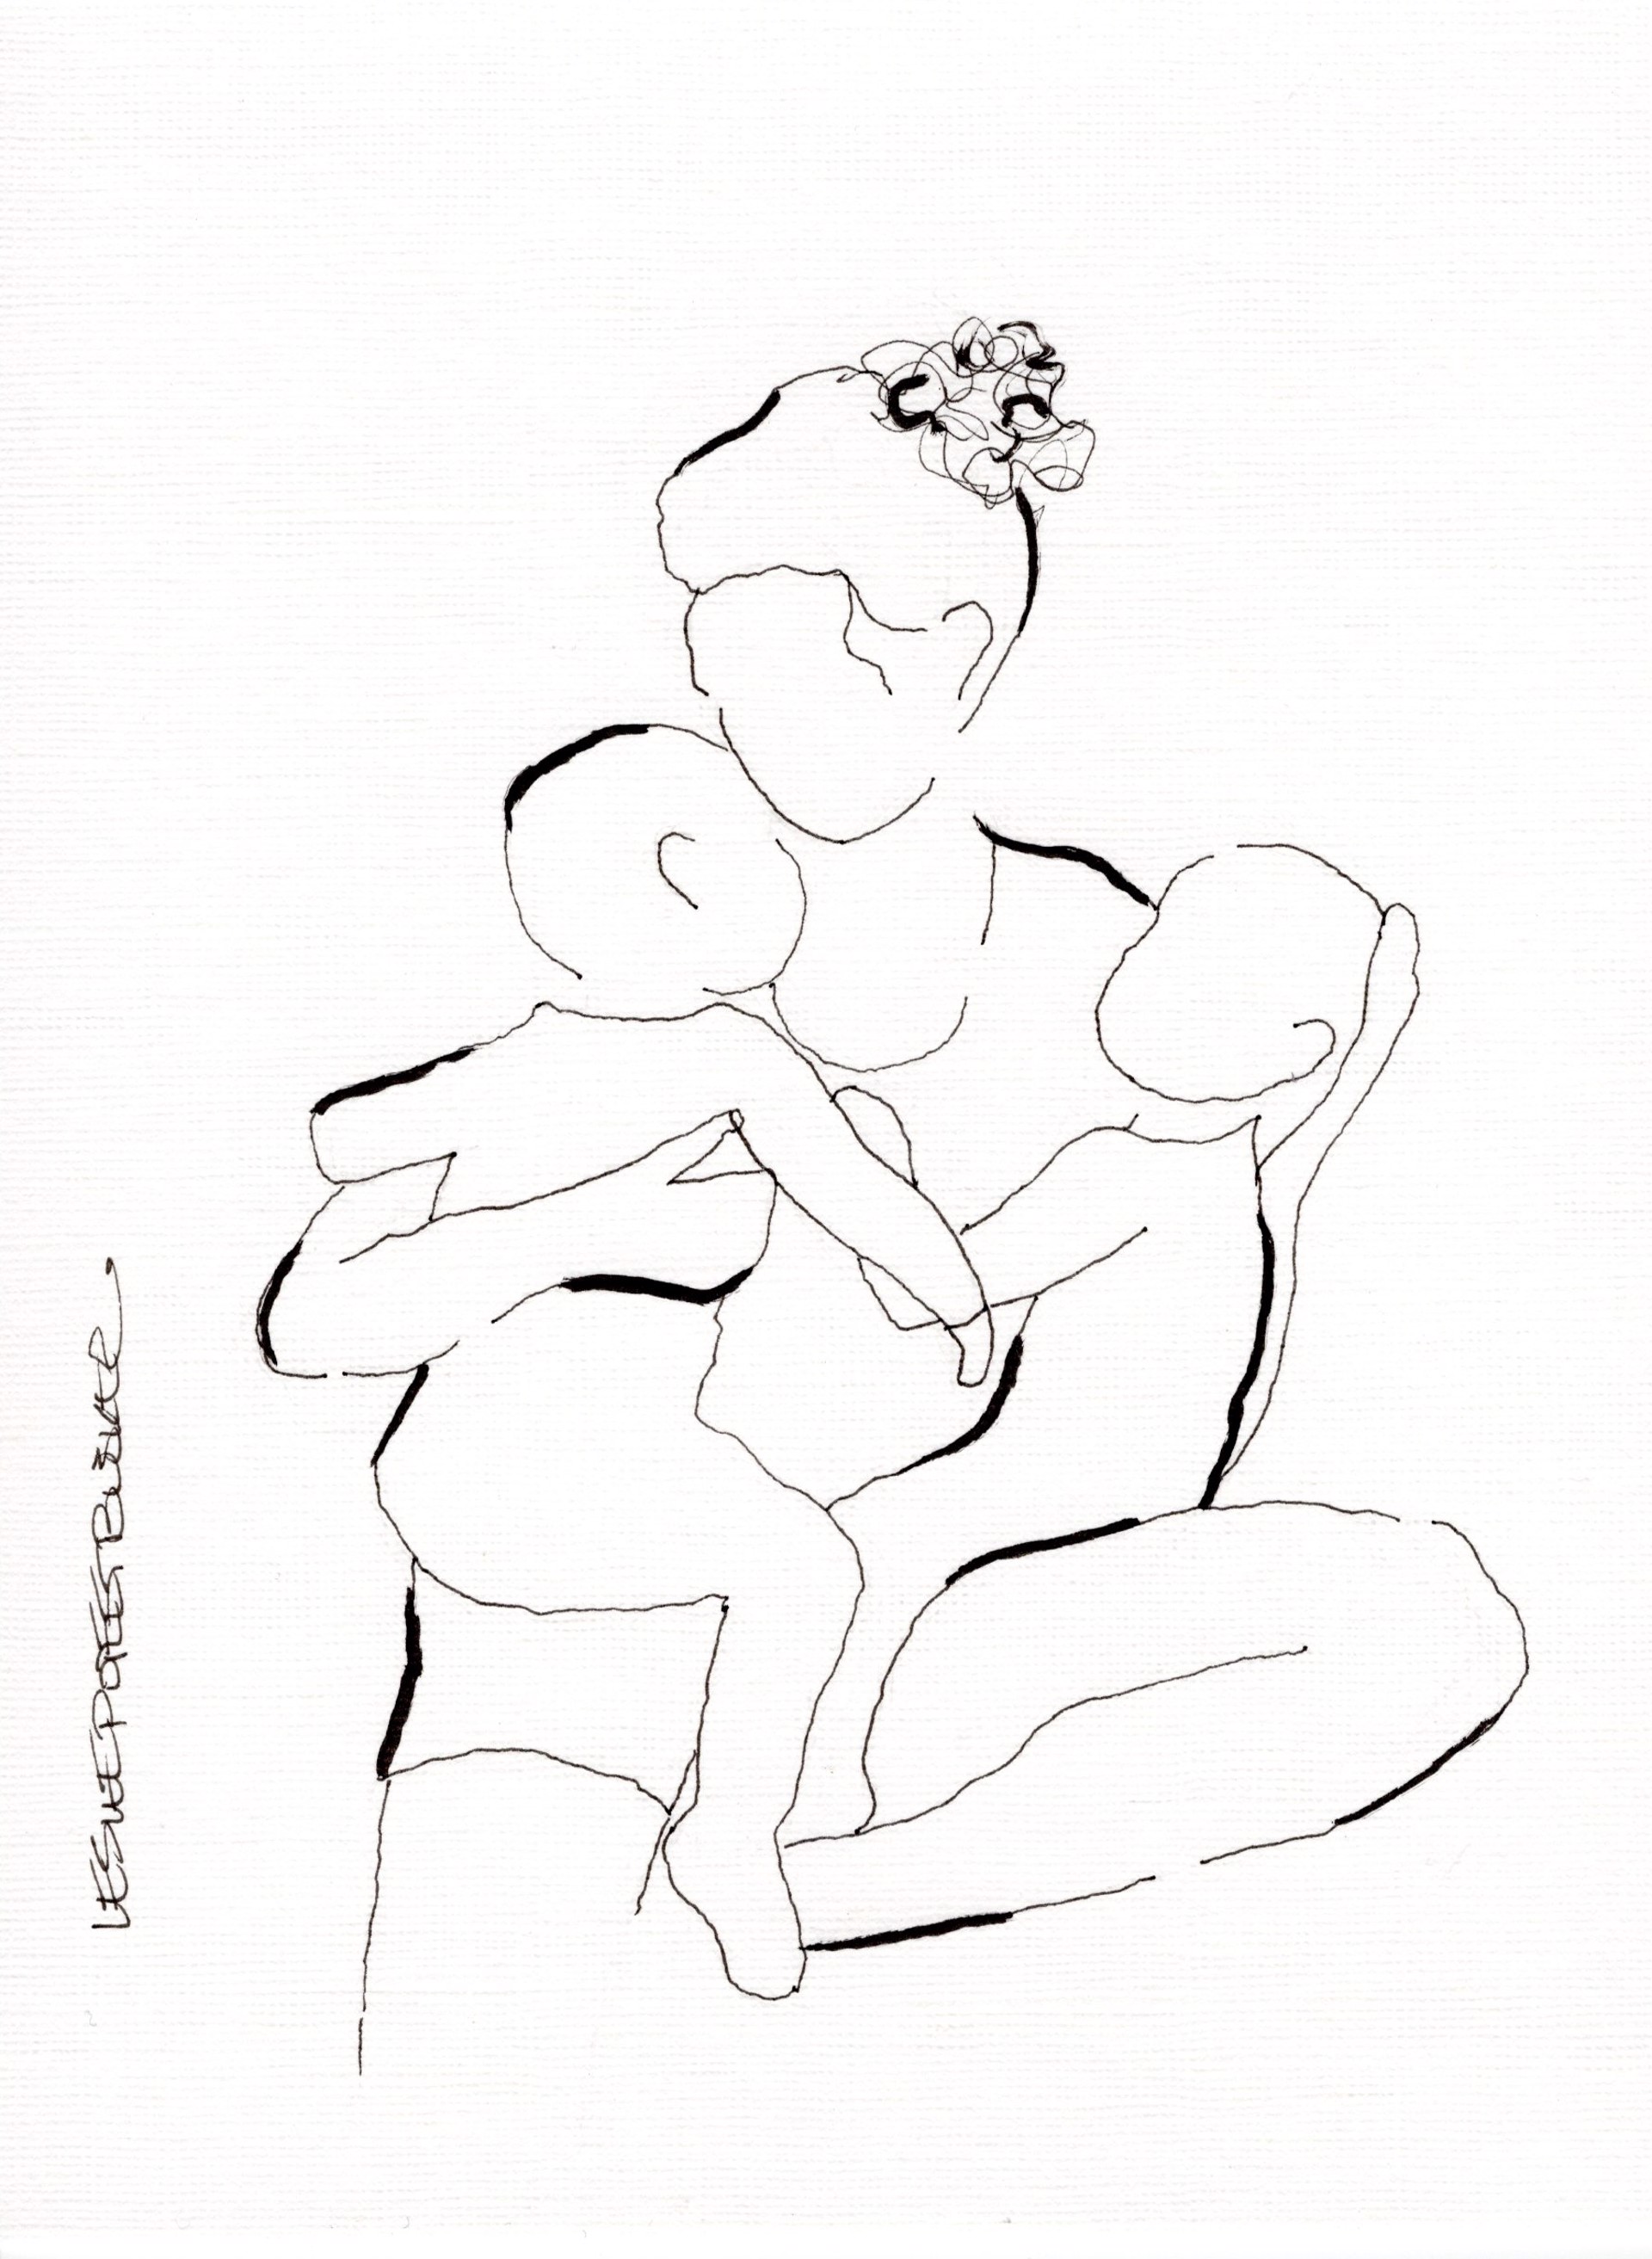 Mother and Child No. 5 by Leslie Poteet Busker